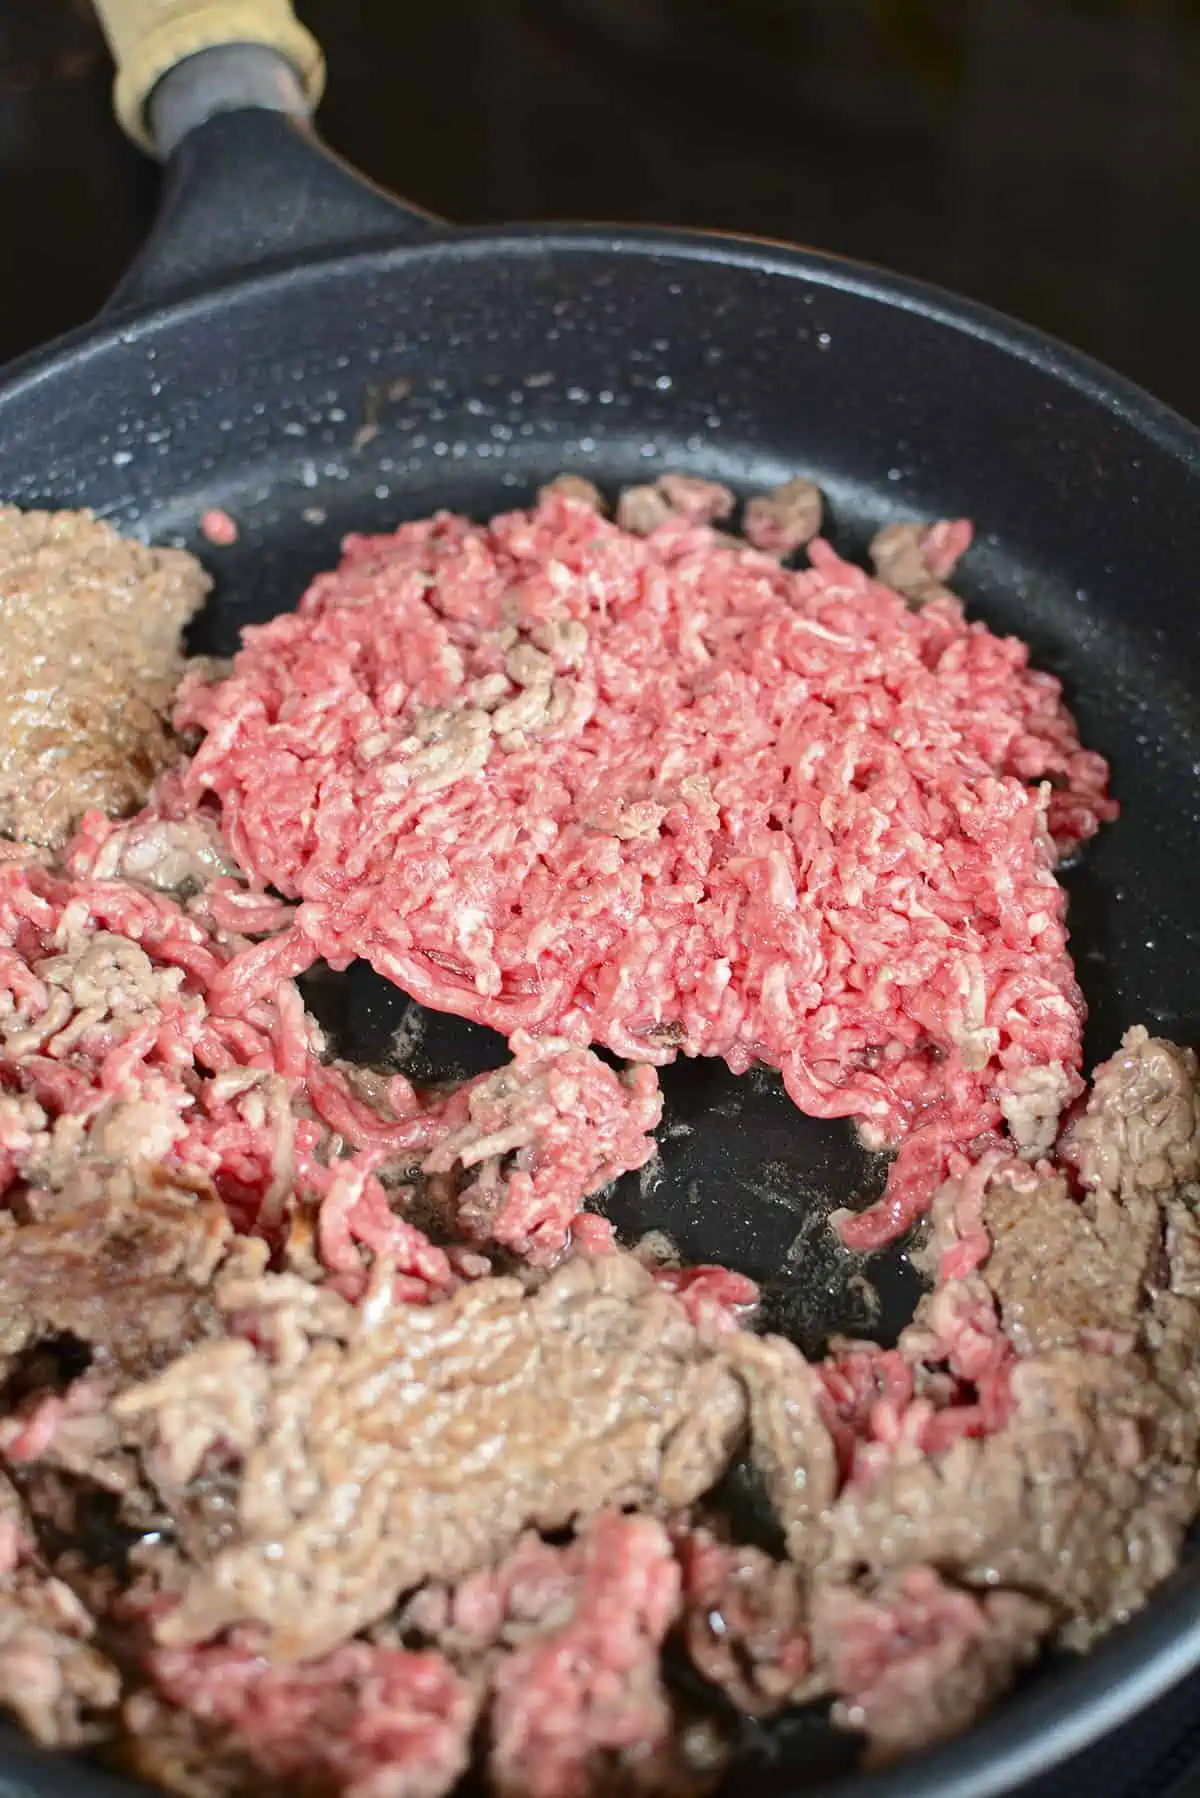 A small portion left of frozen ground beef after searing the sides multiple times. 